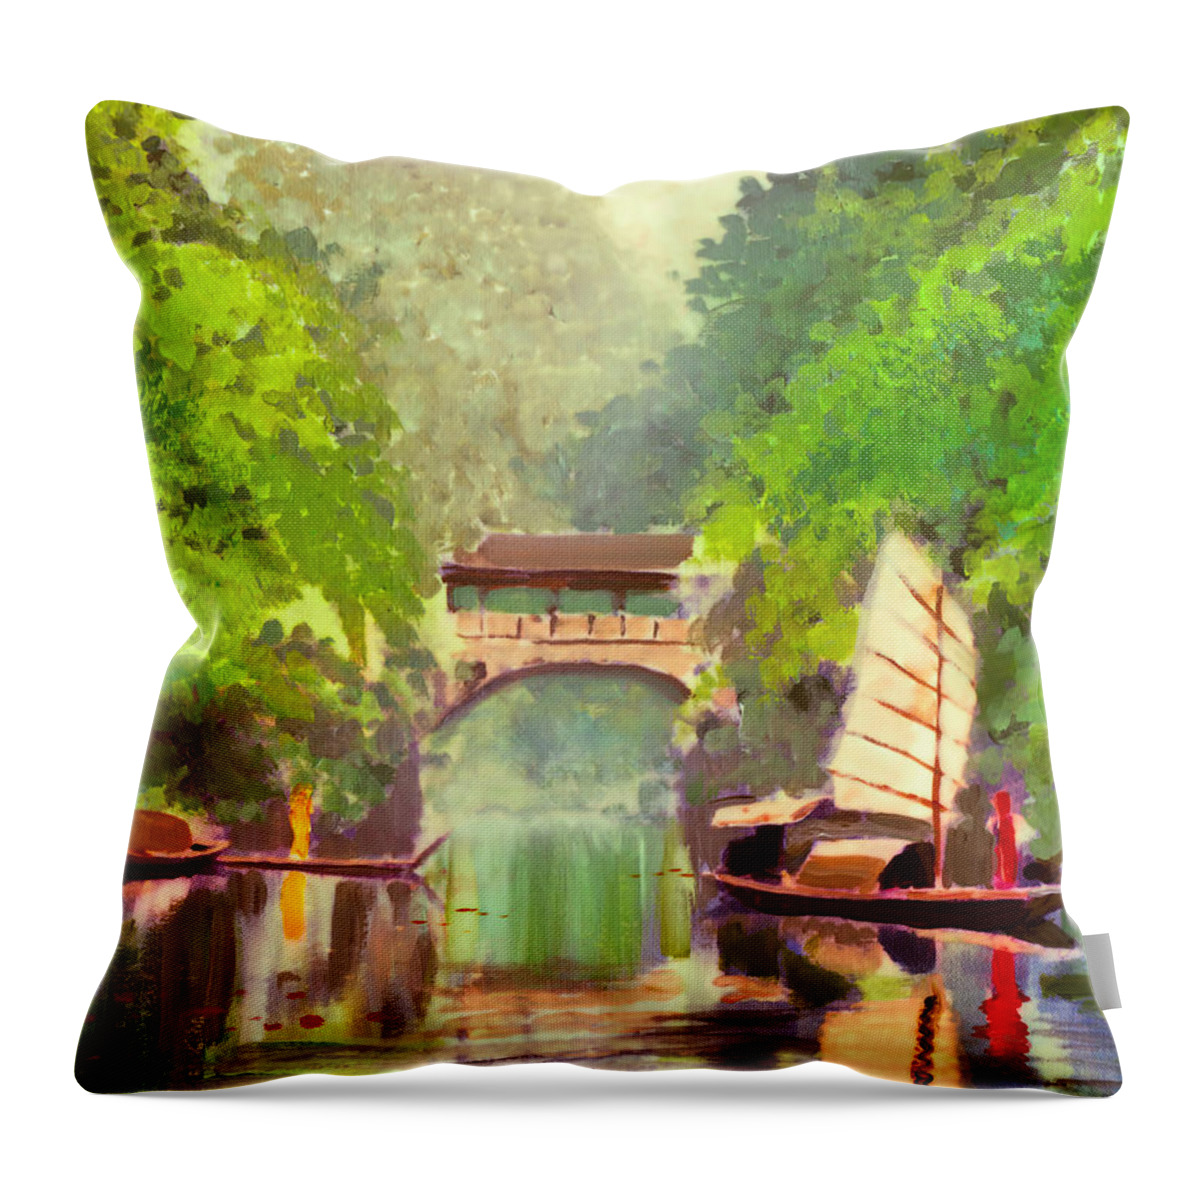 Boat Throw Pillow featuring the painting Boatmen by Melissa Herrin